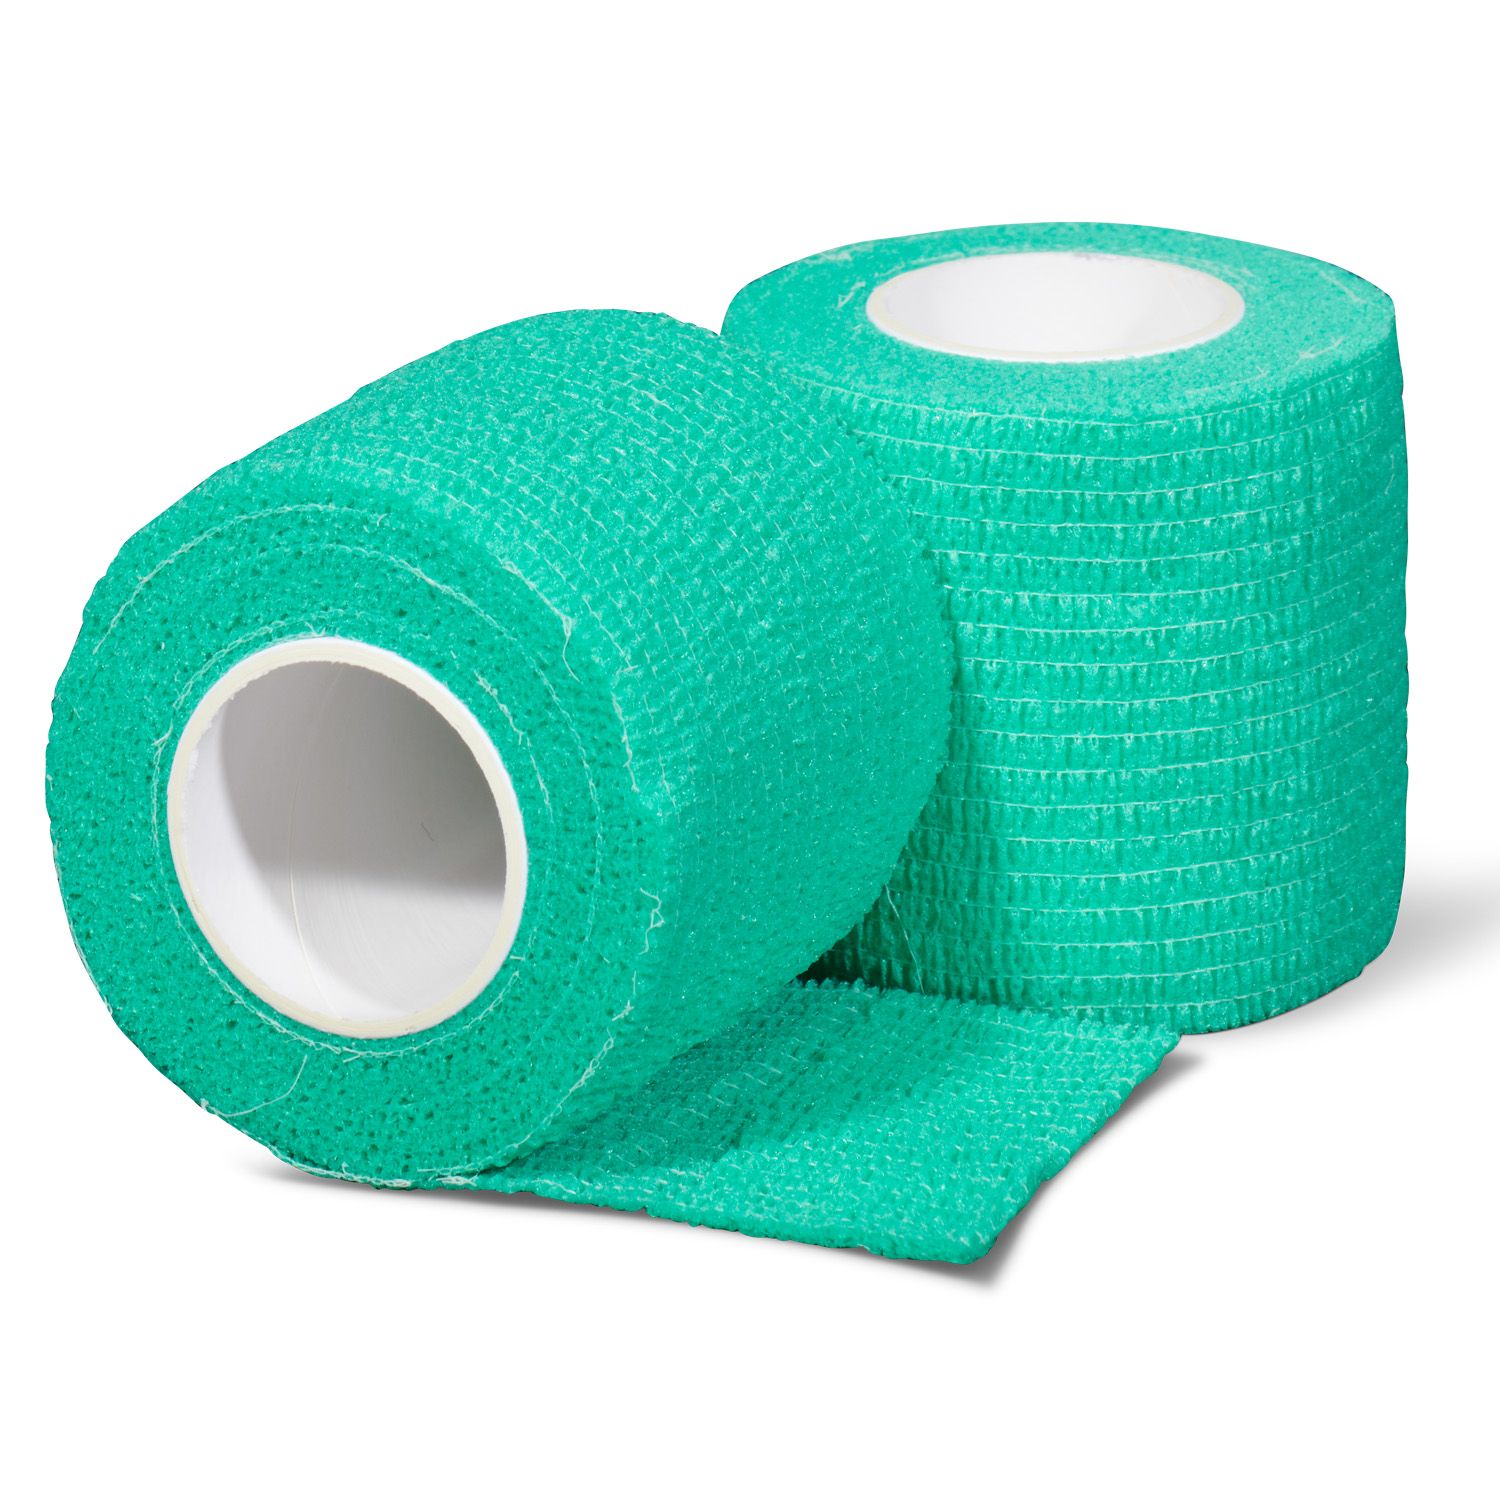 gladiator sports underwrap bandage per roll green frond and back view